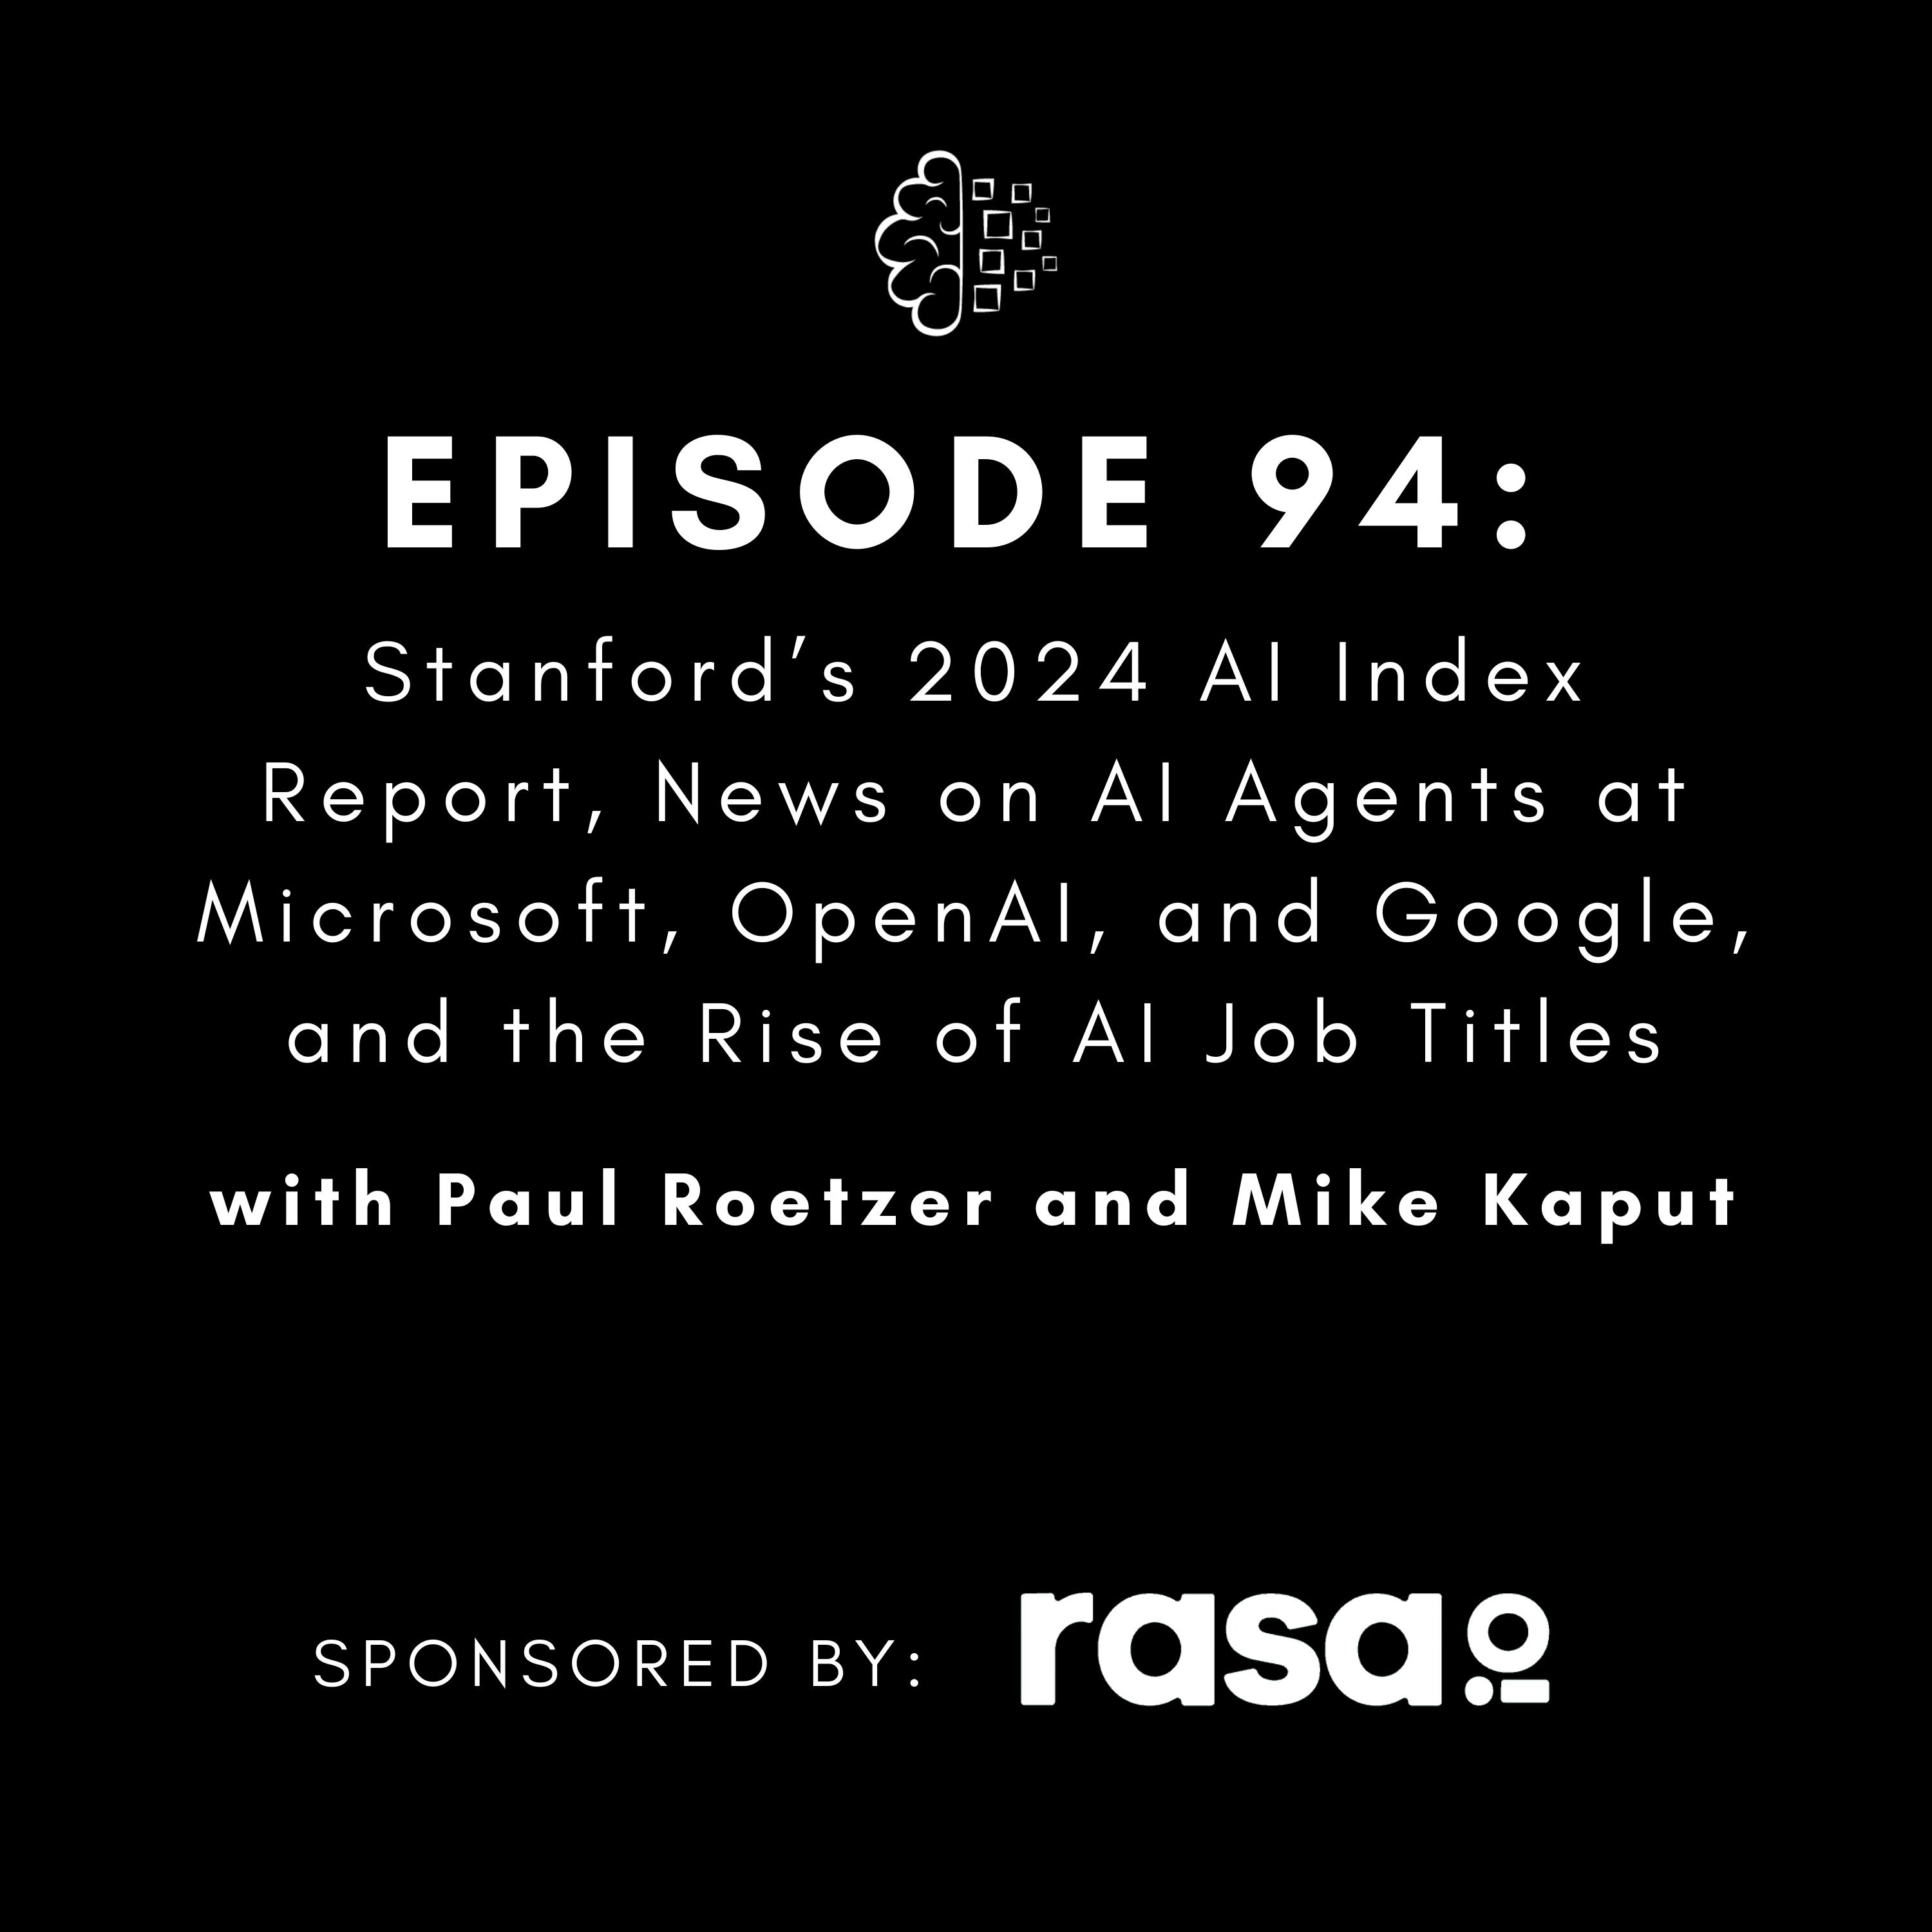 #94: Stanford’s 2024 AI Index Report, News on AI Agents at Microsoft, OpenAI, and Google, and the Rise of AI Job Titles